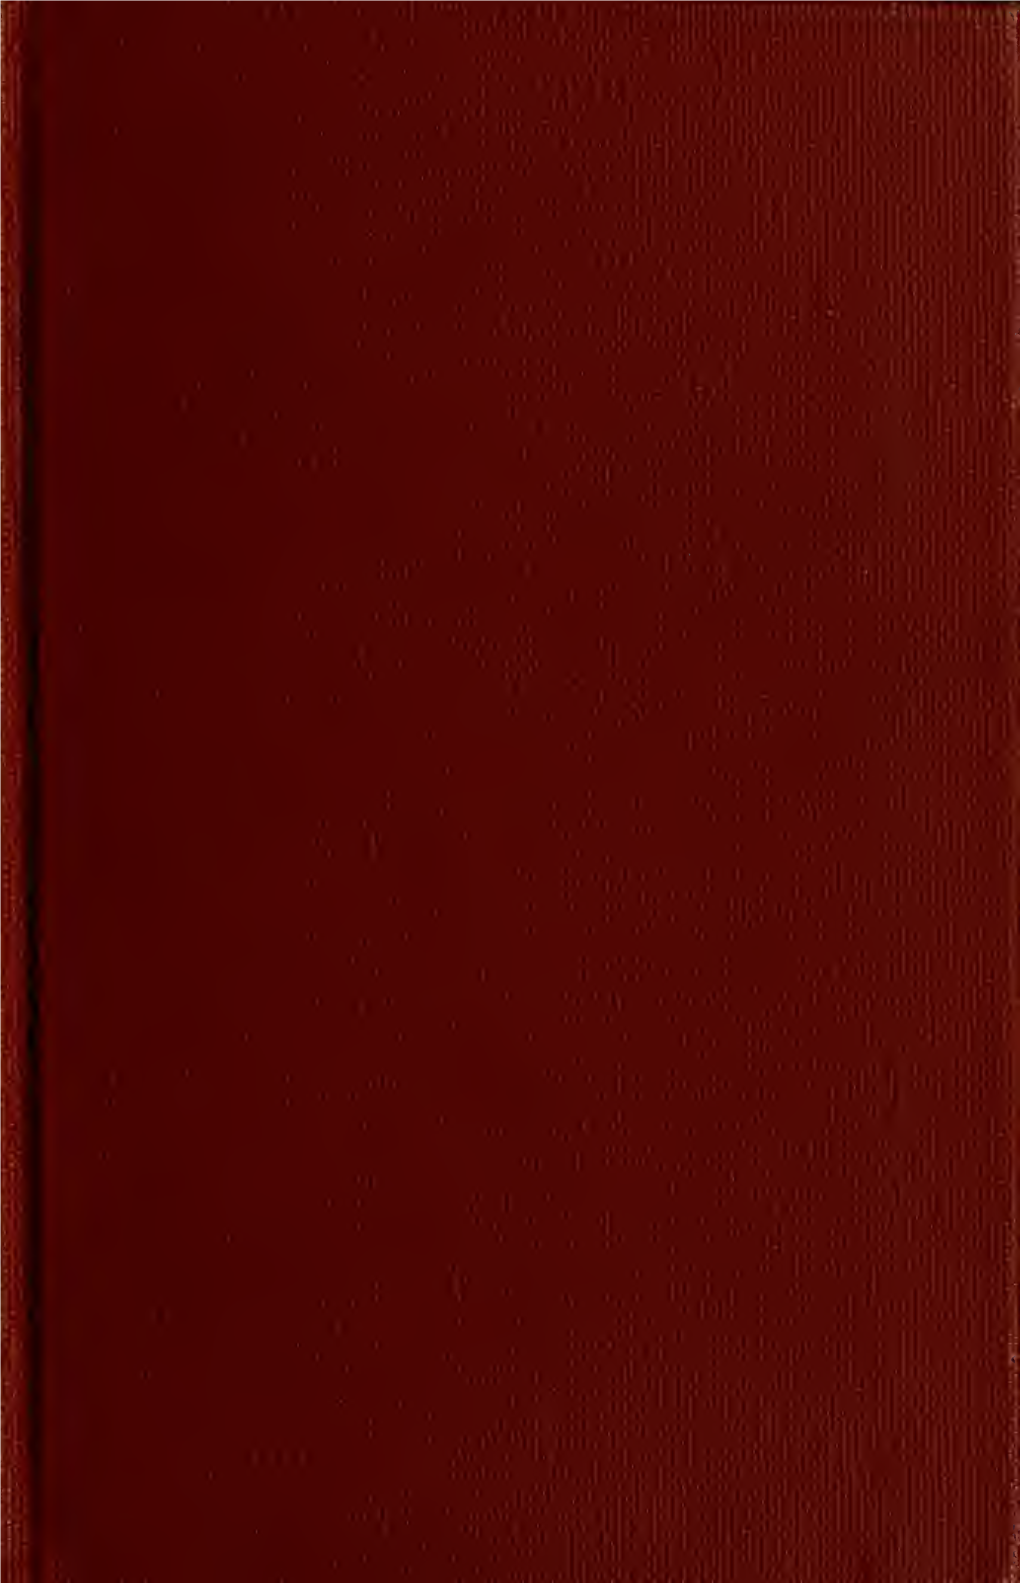 Catalogues of Haverford College, 1876-87